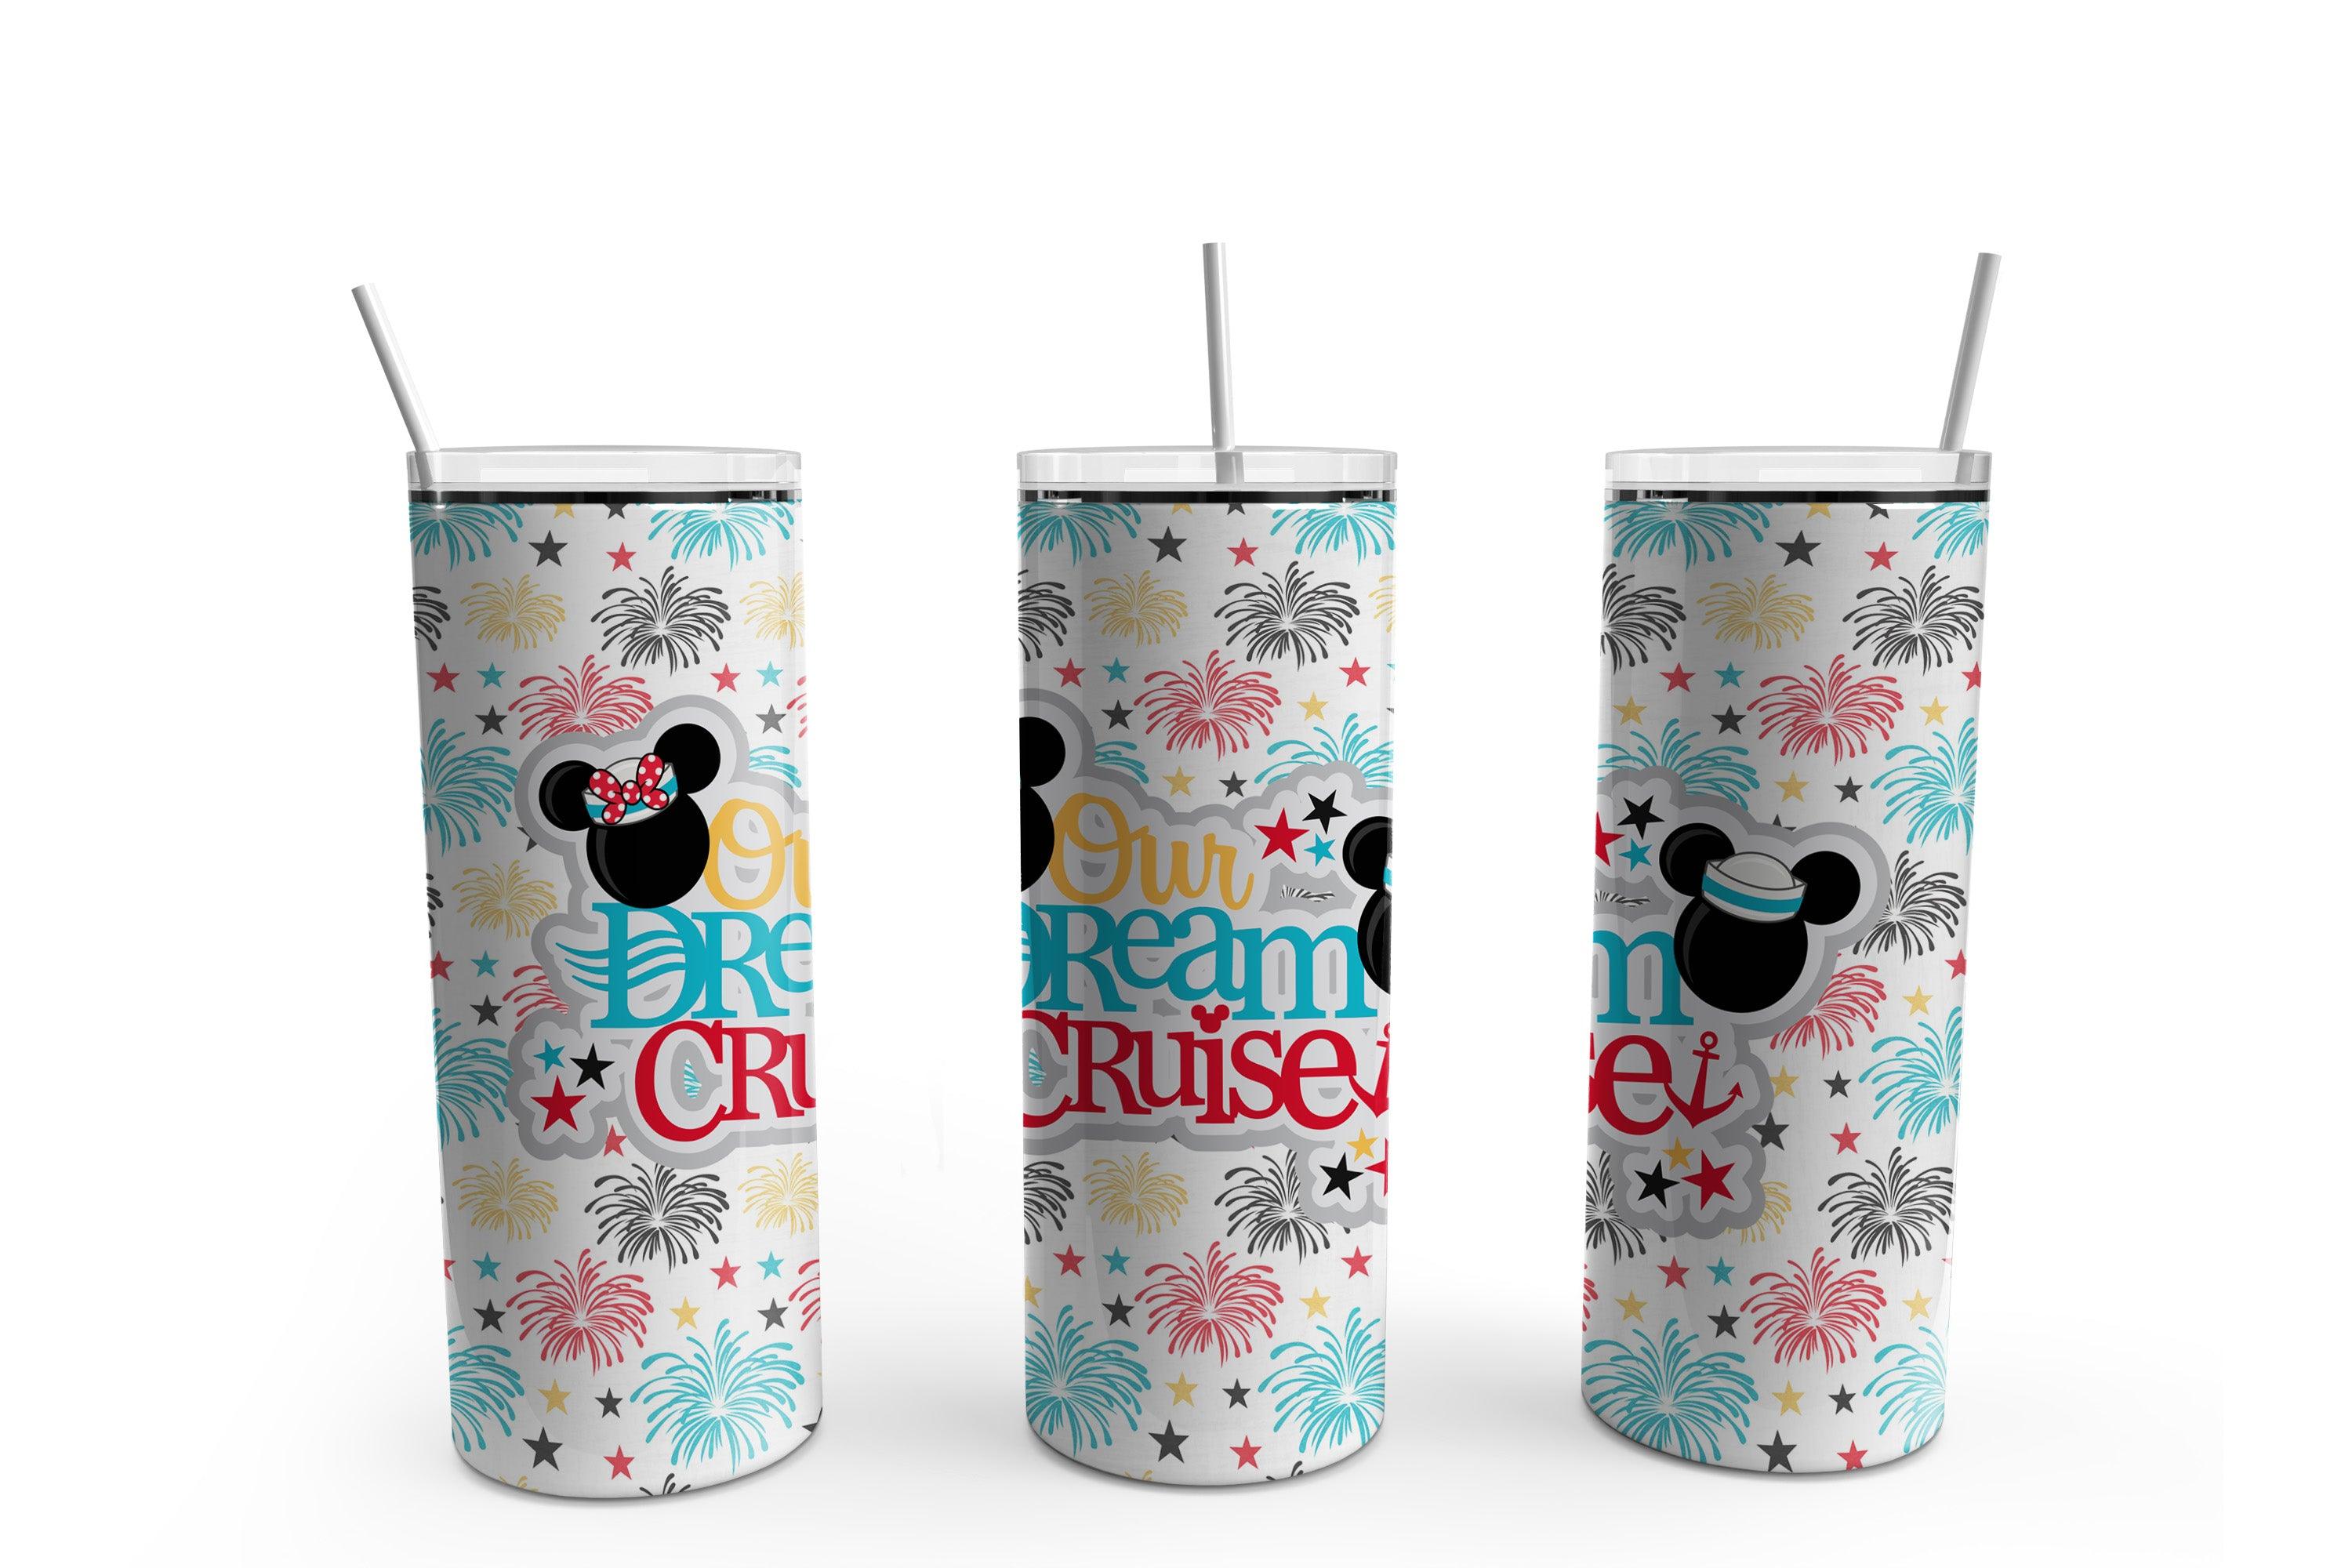 Disneyana Our Dream Cruise 30 oz. Straight Skinny Tumbler by SSC Designs - Scrapbook Supply Companies